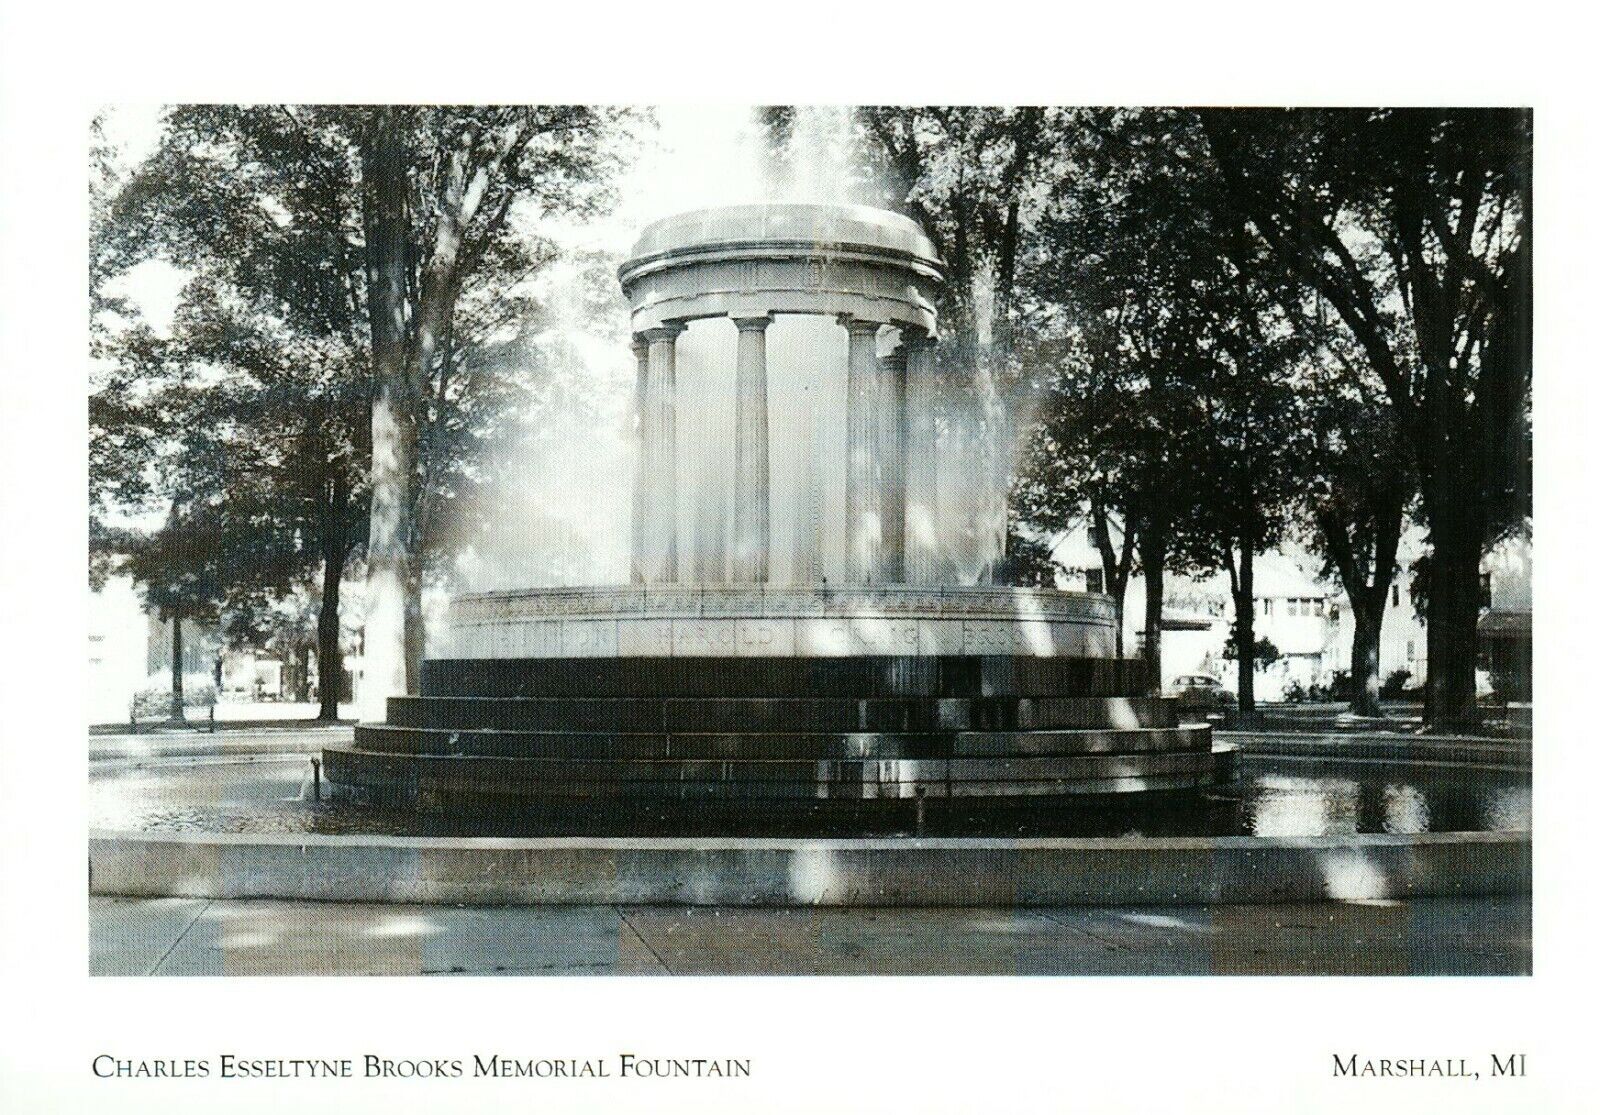 *The Charles Esseltyne Brooks Memorial Fountain